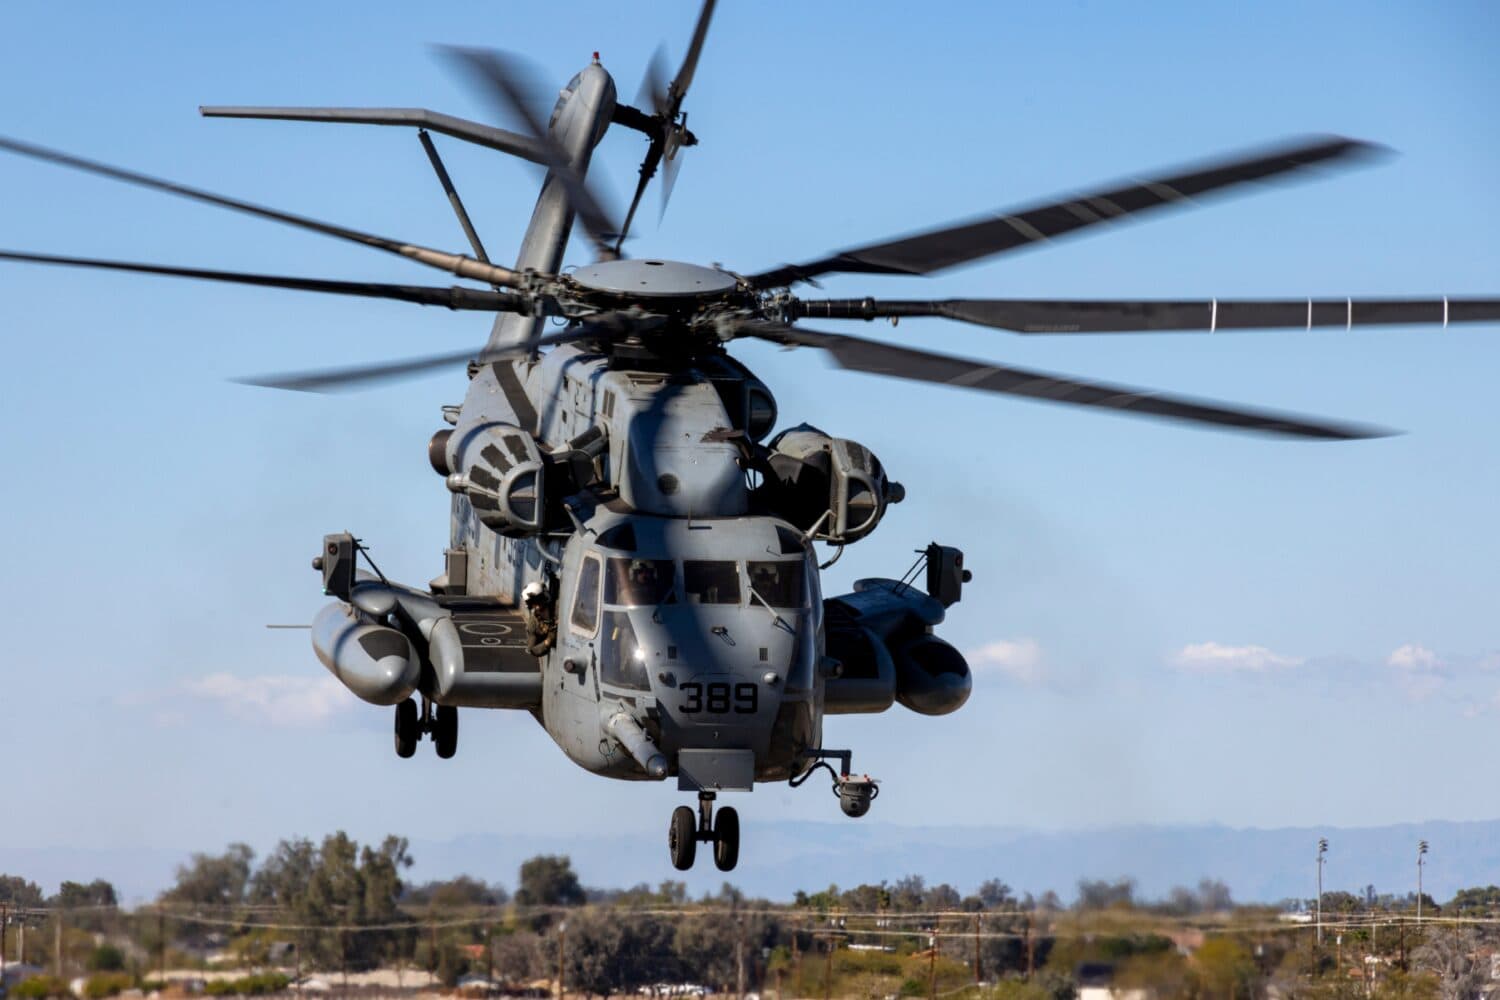 A U.S. Marine Corps CH-53E Super Stallion helicopter assigned to Marine Heavy Helicopter